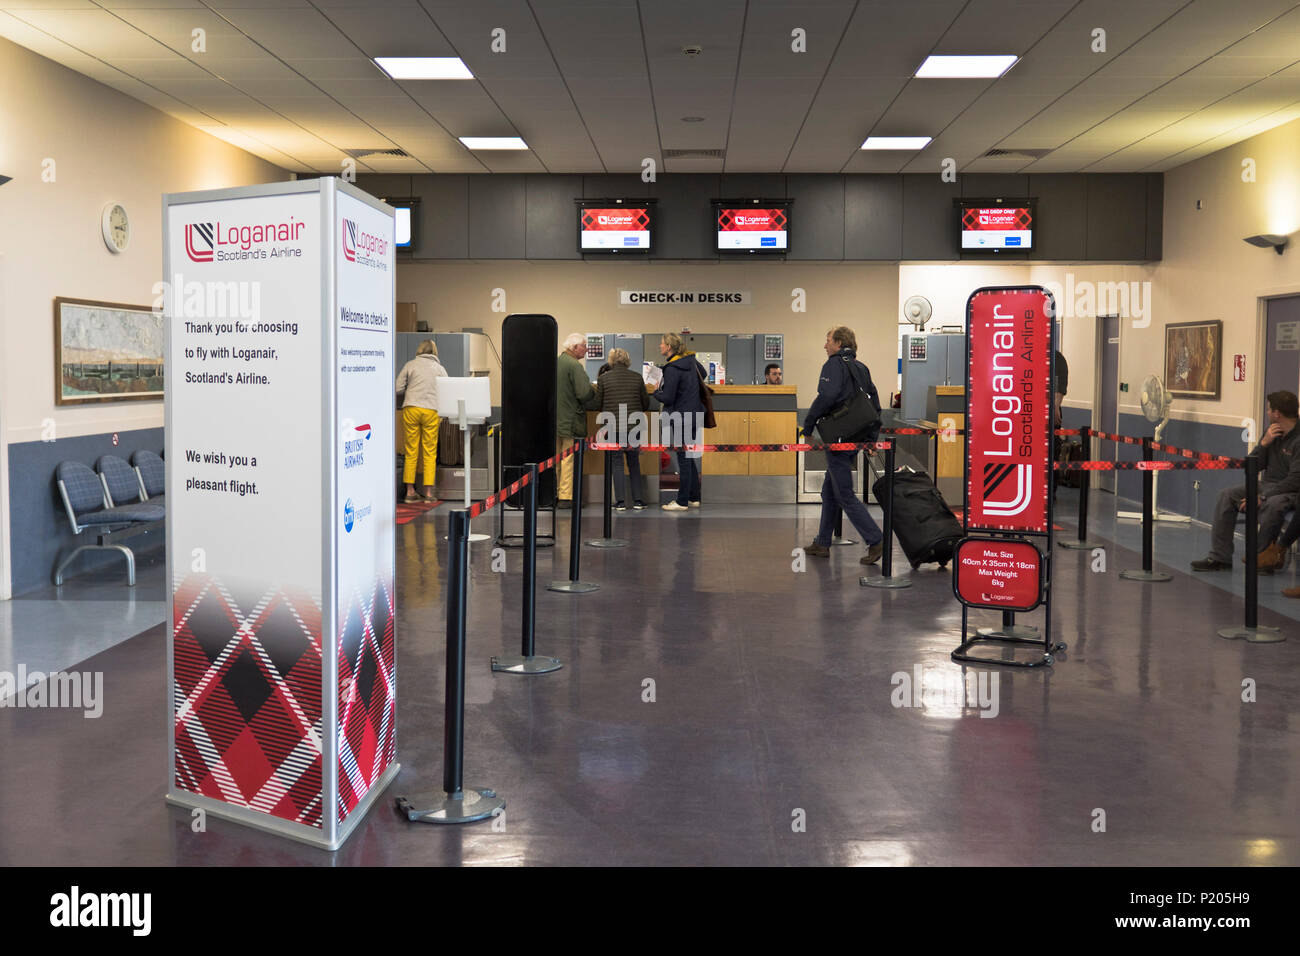 dh Loganair checkin desks KIRKWALL AIRPORT ORKNEY Passenger queue baggage desk people regional airports checking in luggage uk small check scotland Stock Photo